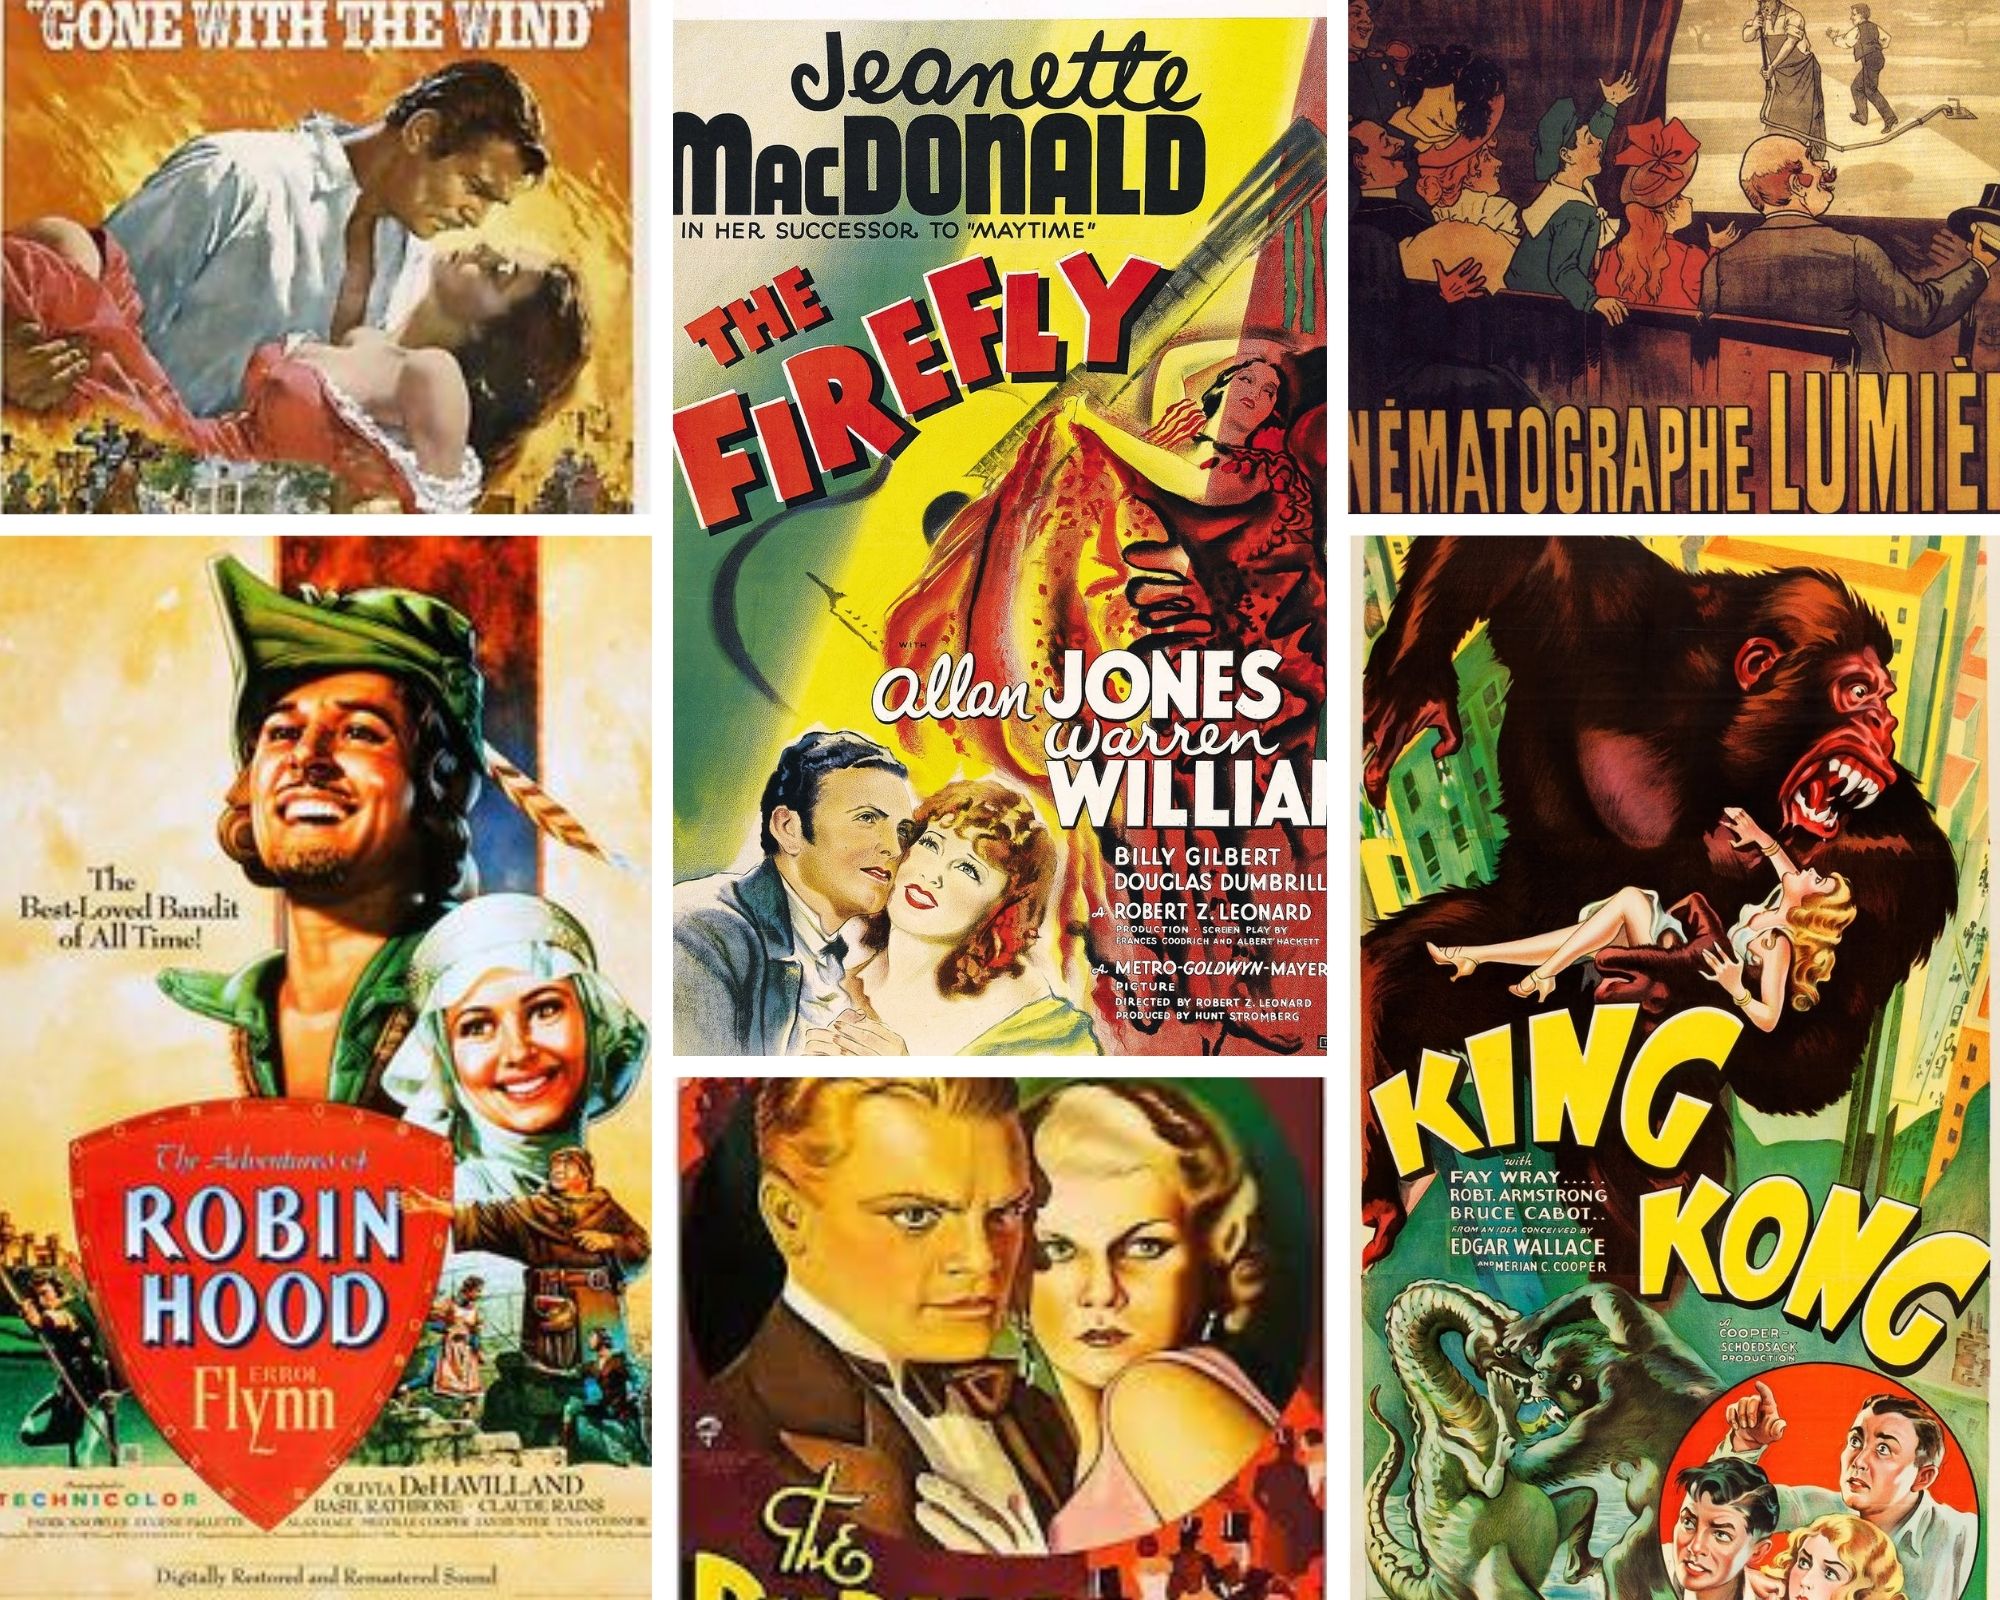 Film posters from the Golden Age of Hollywood